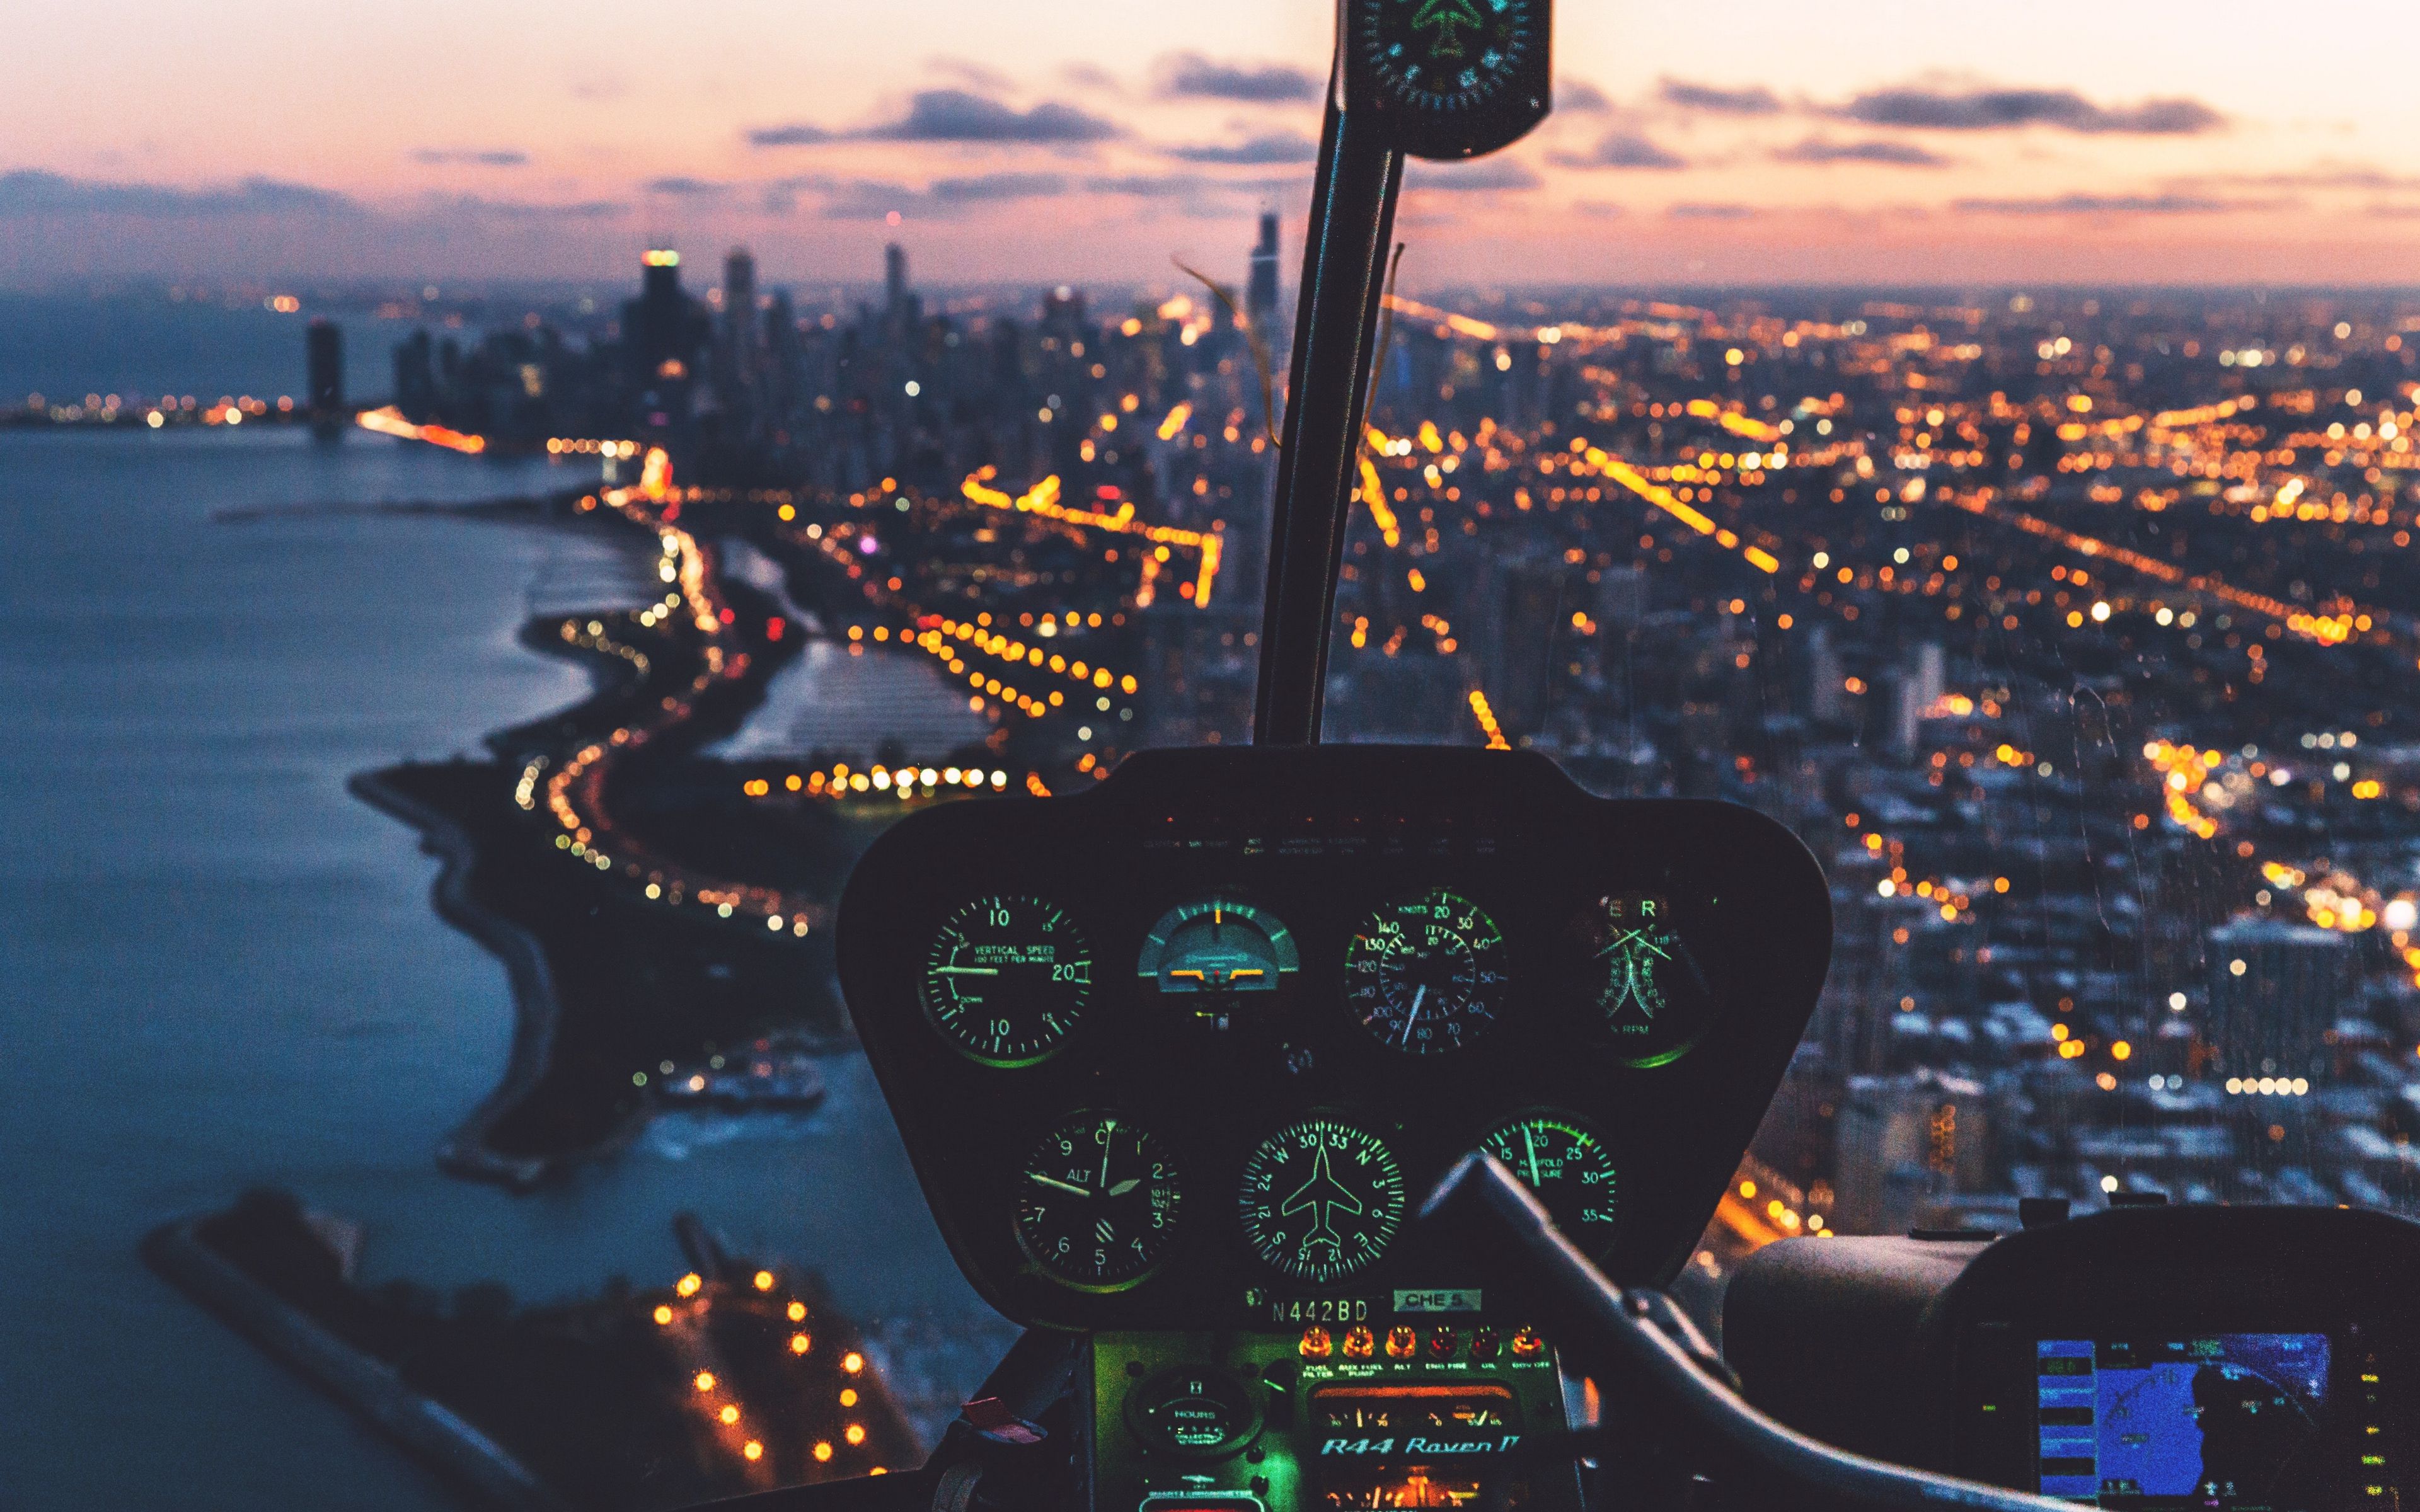 Download wallpaper 3840x2400 control panel helicopter pilot night city  glare 4k ultra hd 1610 hd background